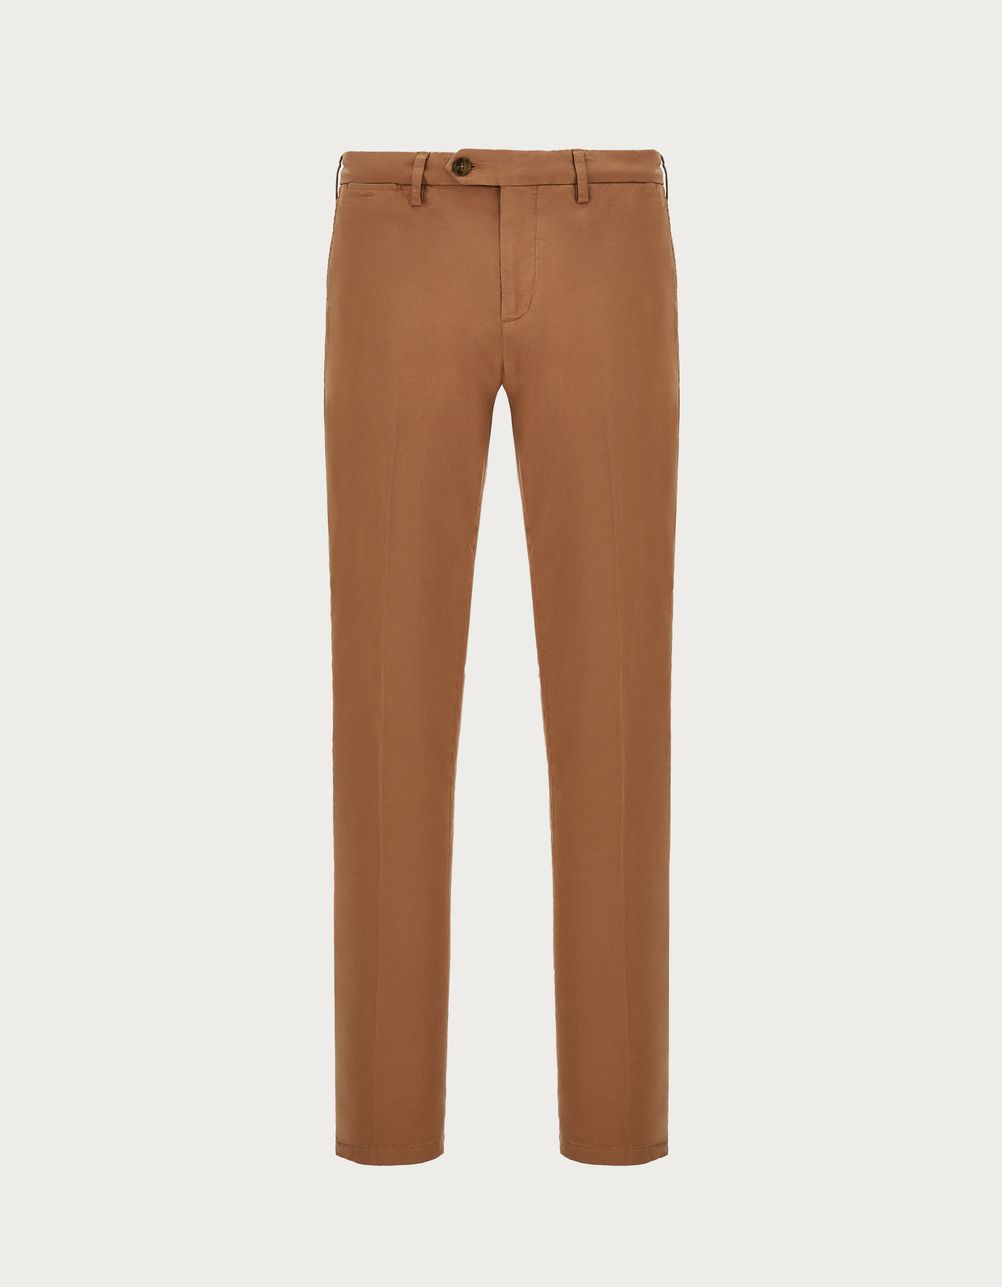 Cinnamon garment-dyed cotton microtwill chinos in a regular fit